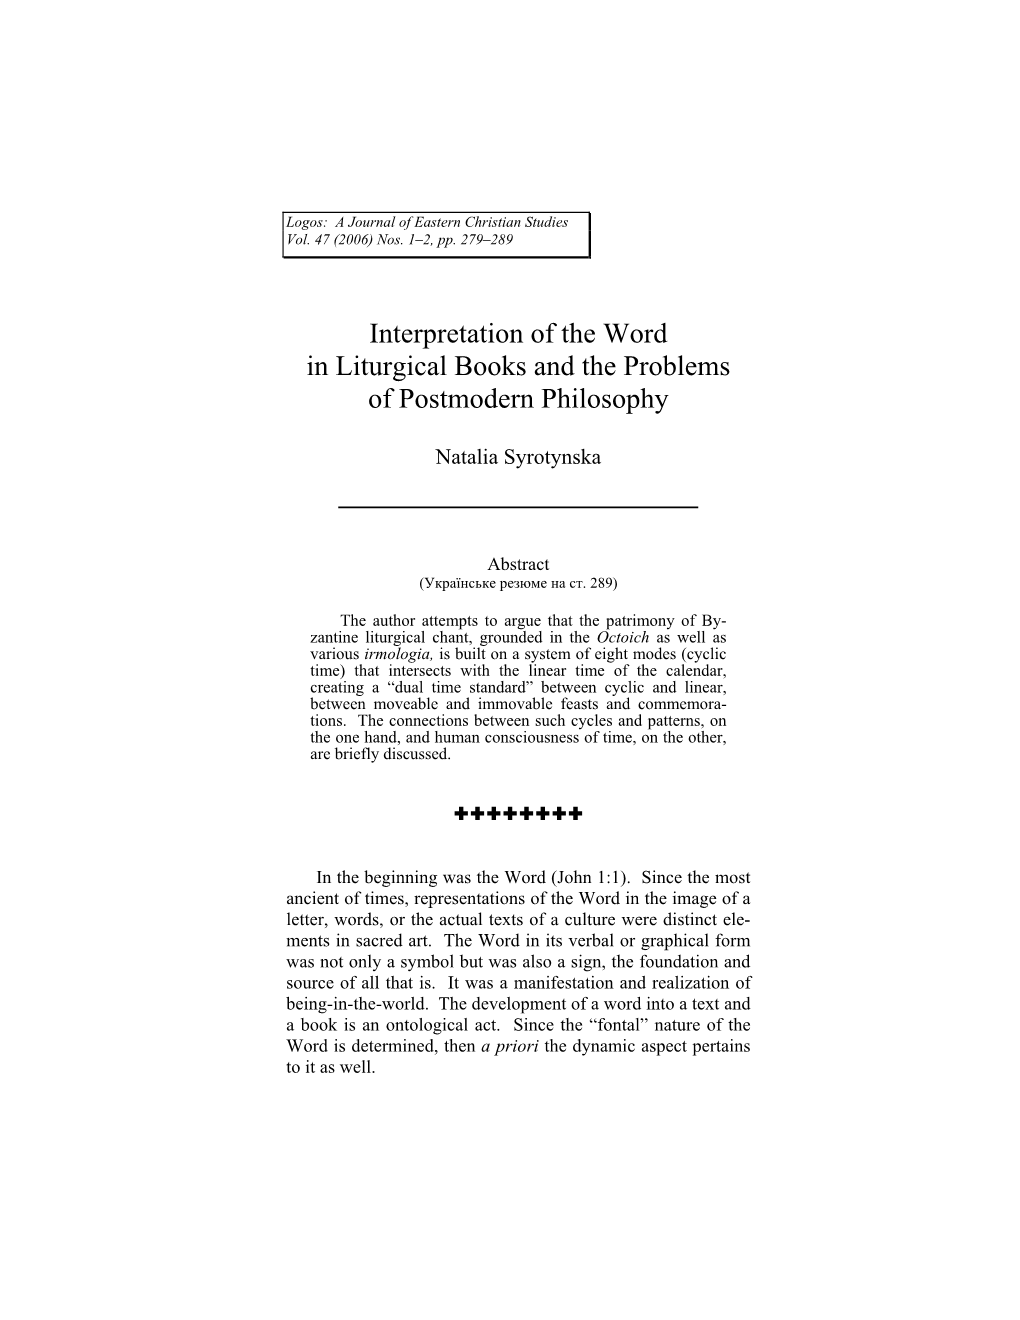 Interpretation of the Word in Liturgical Books and the Problems of Postmodern Philosophy